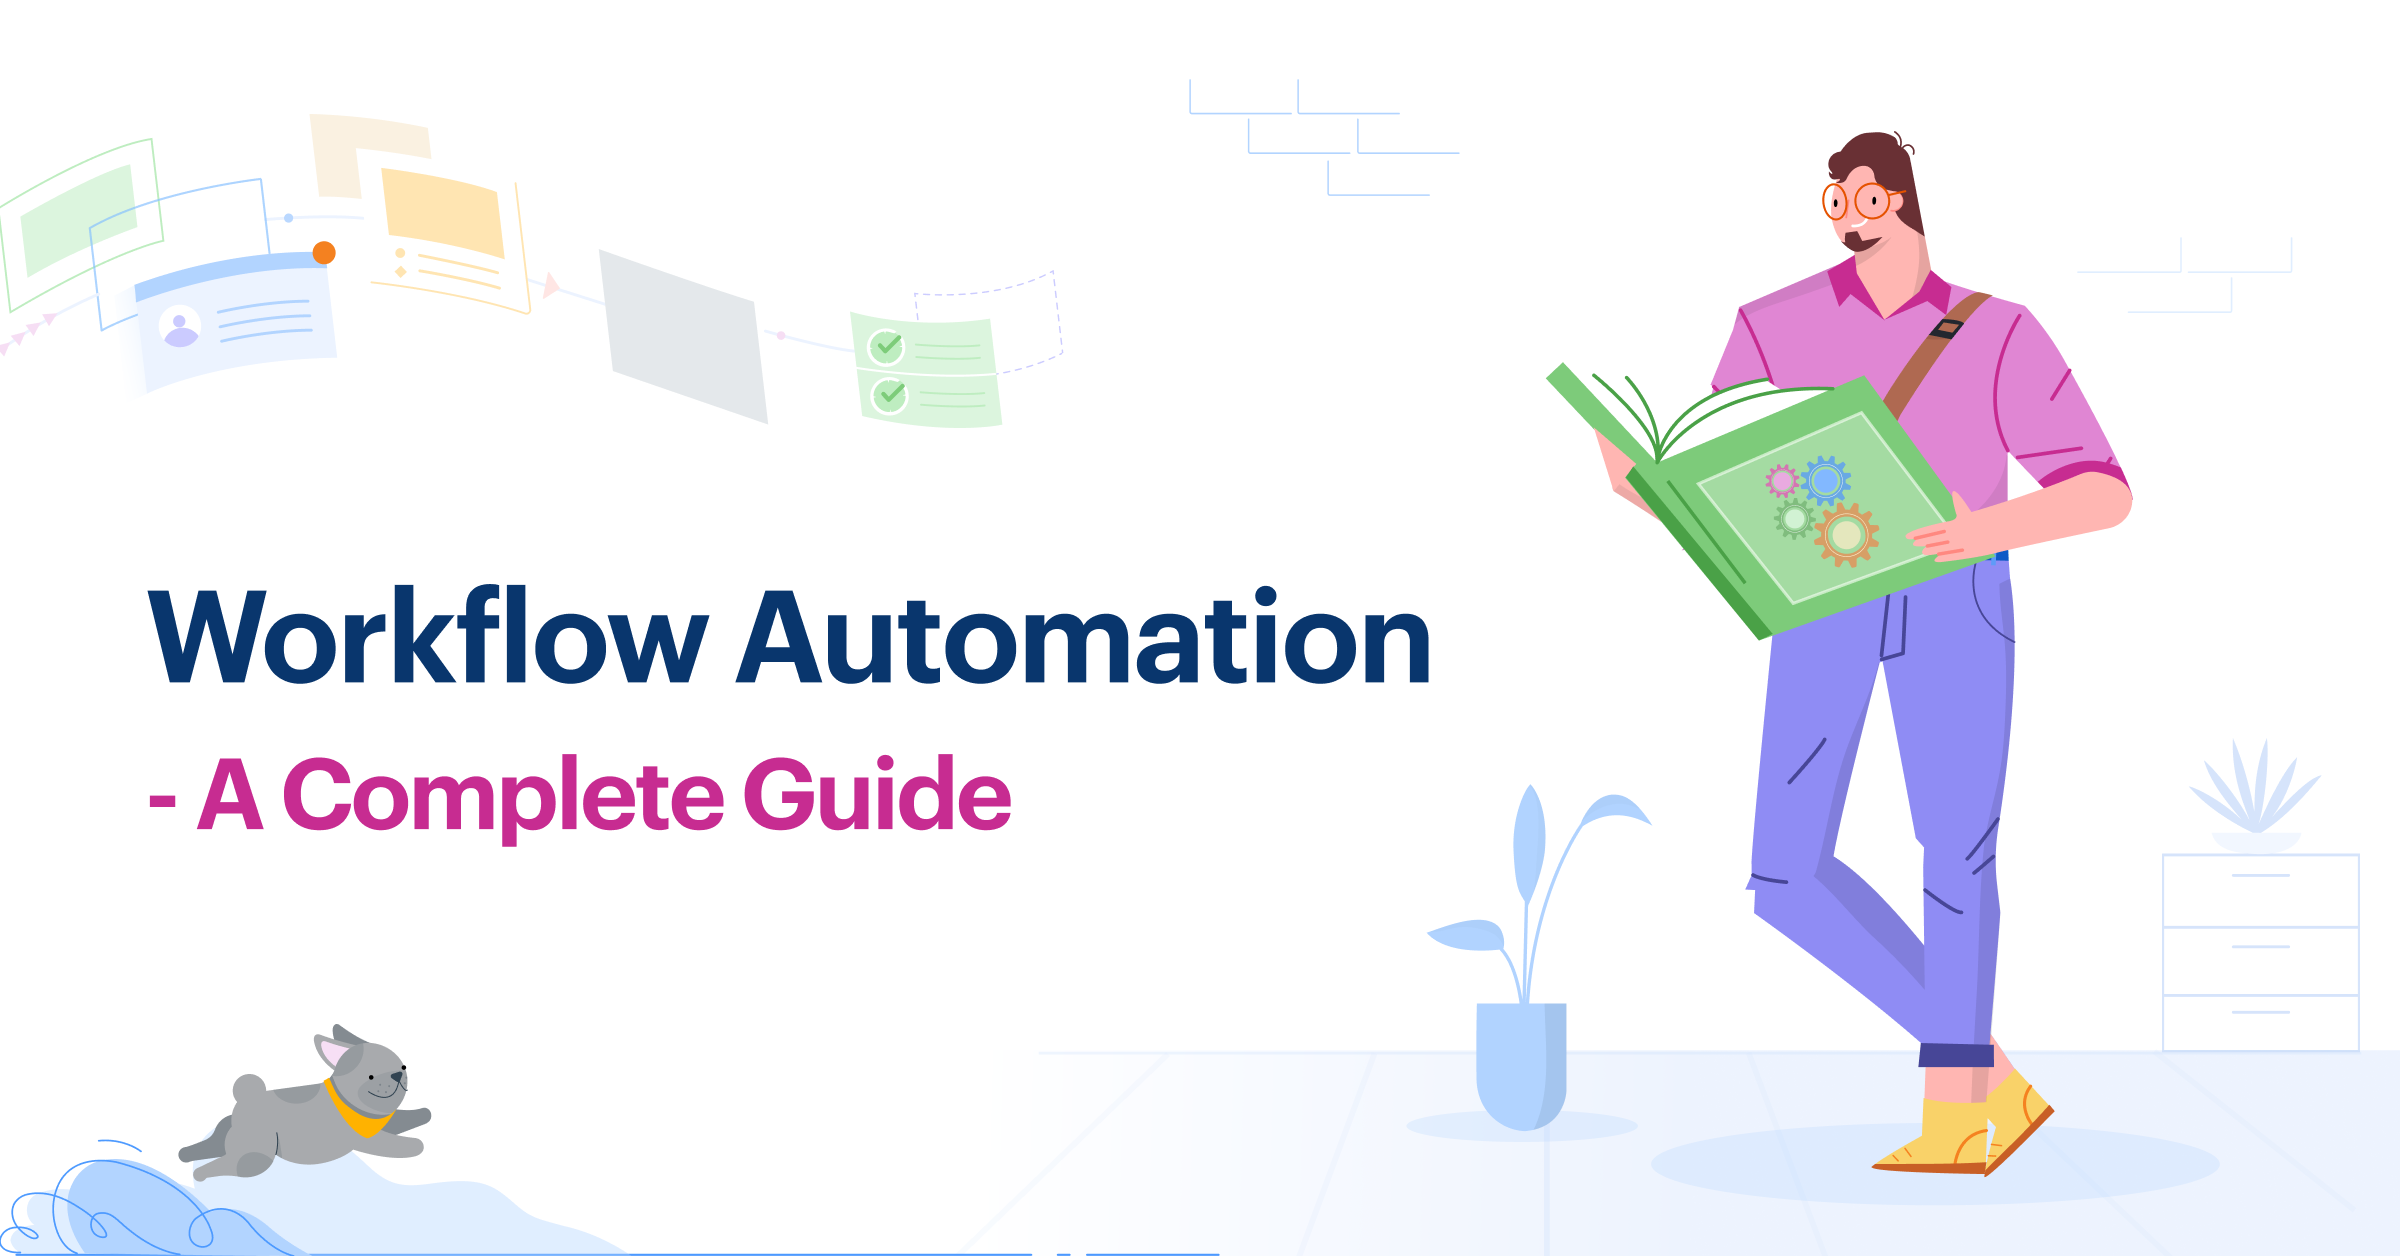 Workflow Automation - Complete Guide